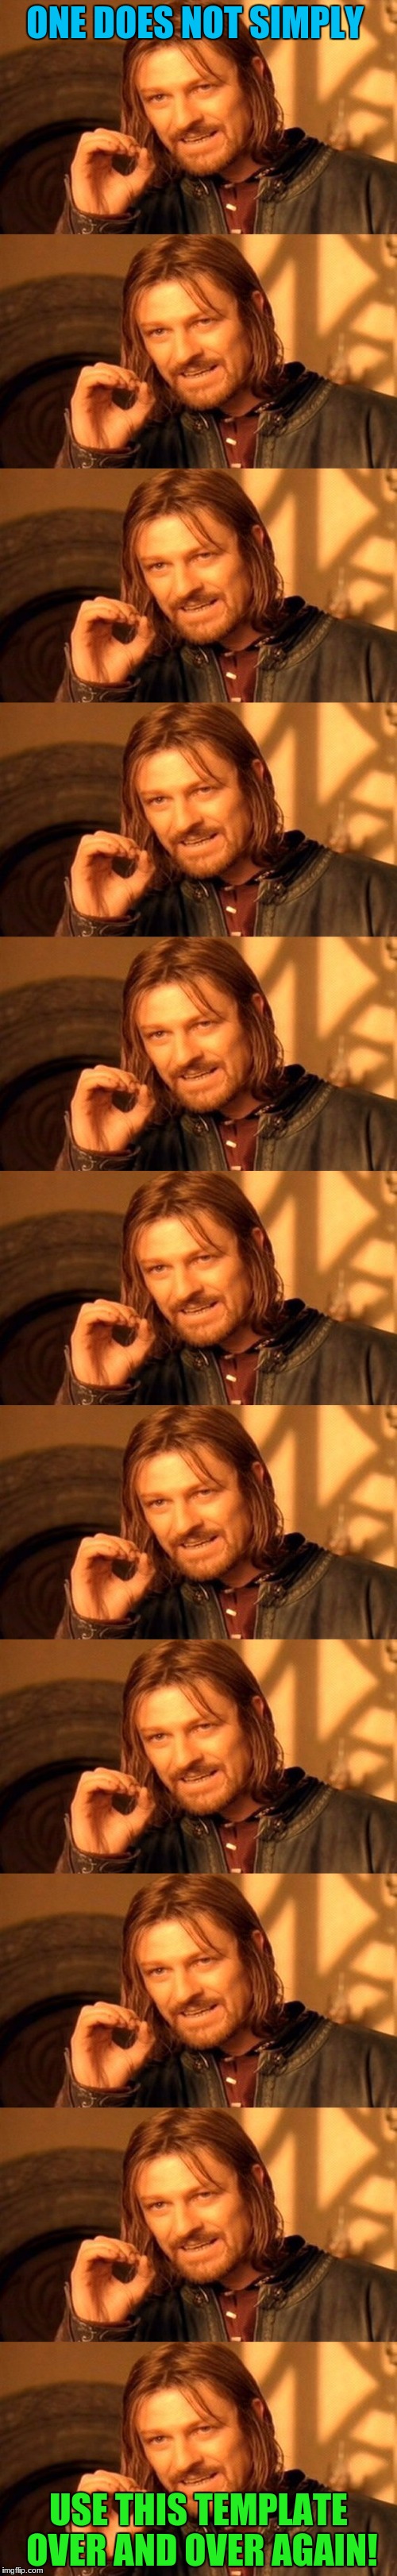 One Does Not Simply etc. | ONE DOES NOT SIMPLY; USE THIS TEMPLATE OVER AND OVER AGAIN! | image tagged in memes,funny,etc,onedoesnotsimply,repeat,template | made w/ Imgflip meme maker